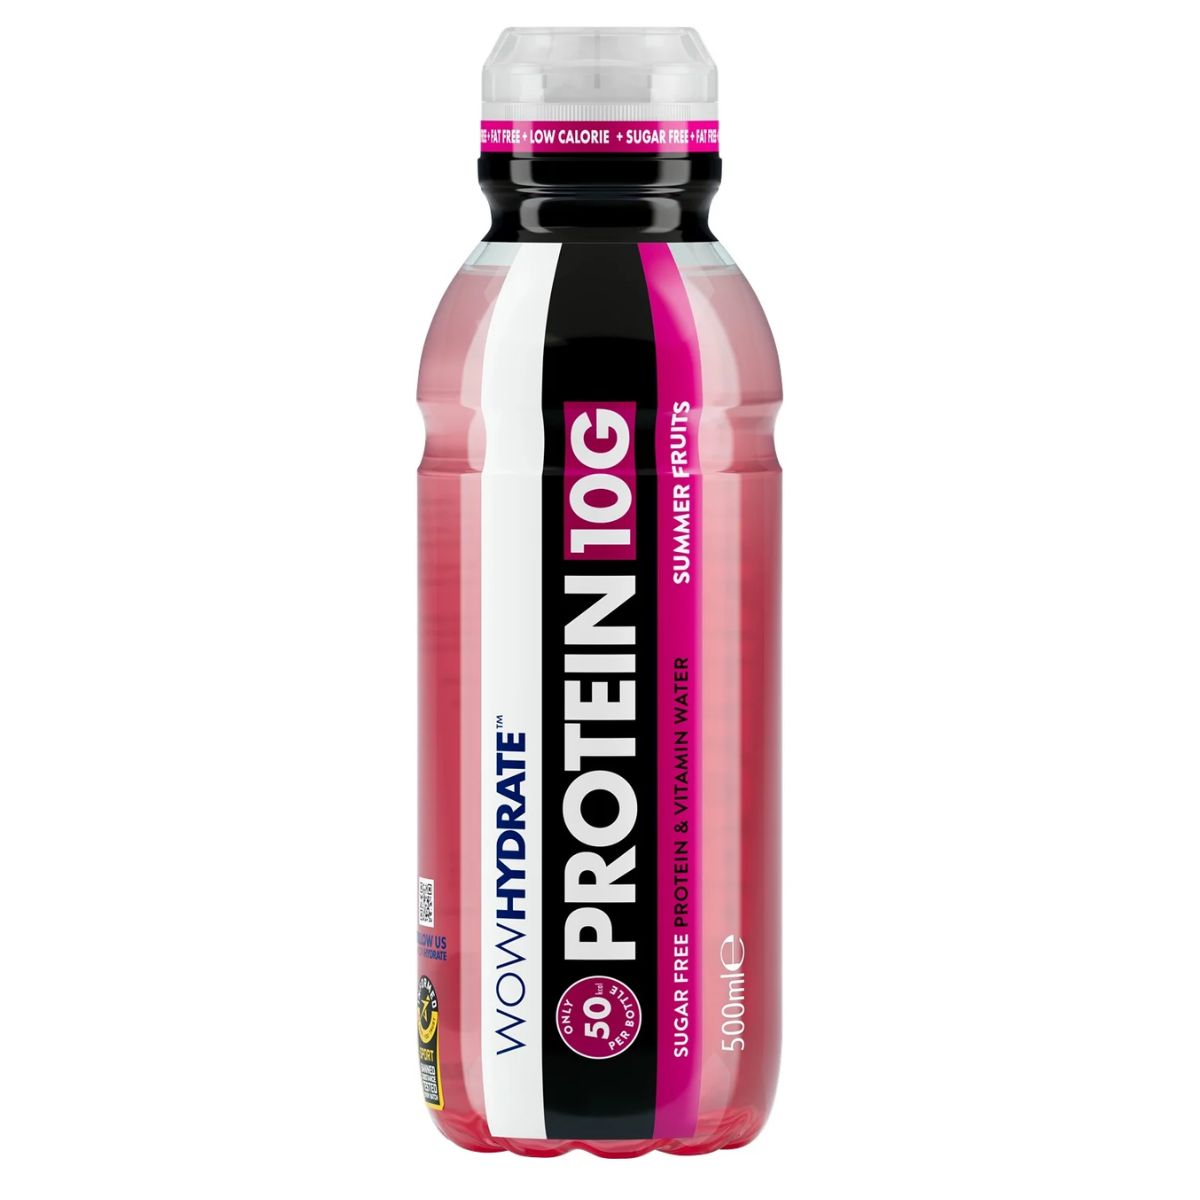 A bottle of Wow Hydrate - Protein 10g Summer Fruits - 500ml on a white background.